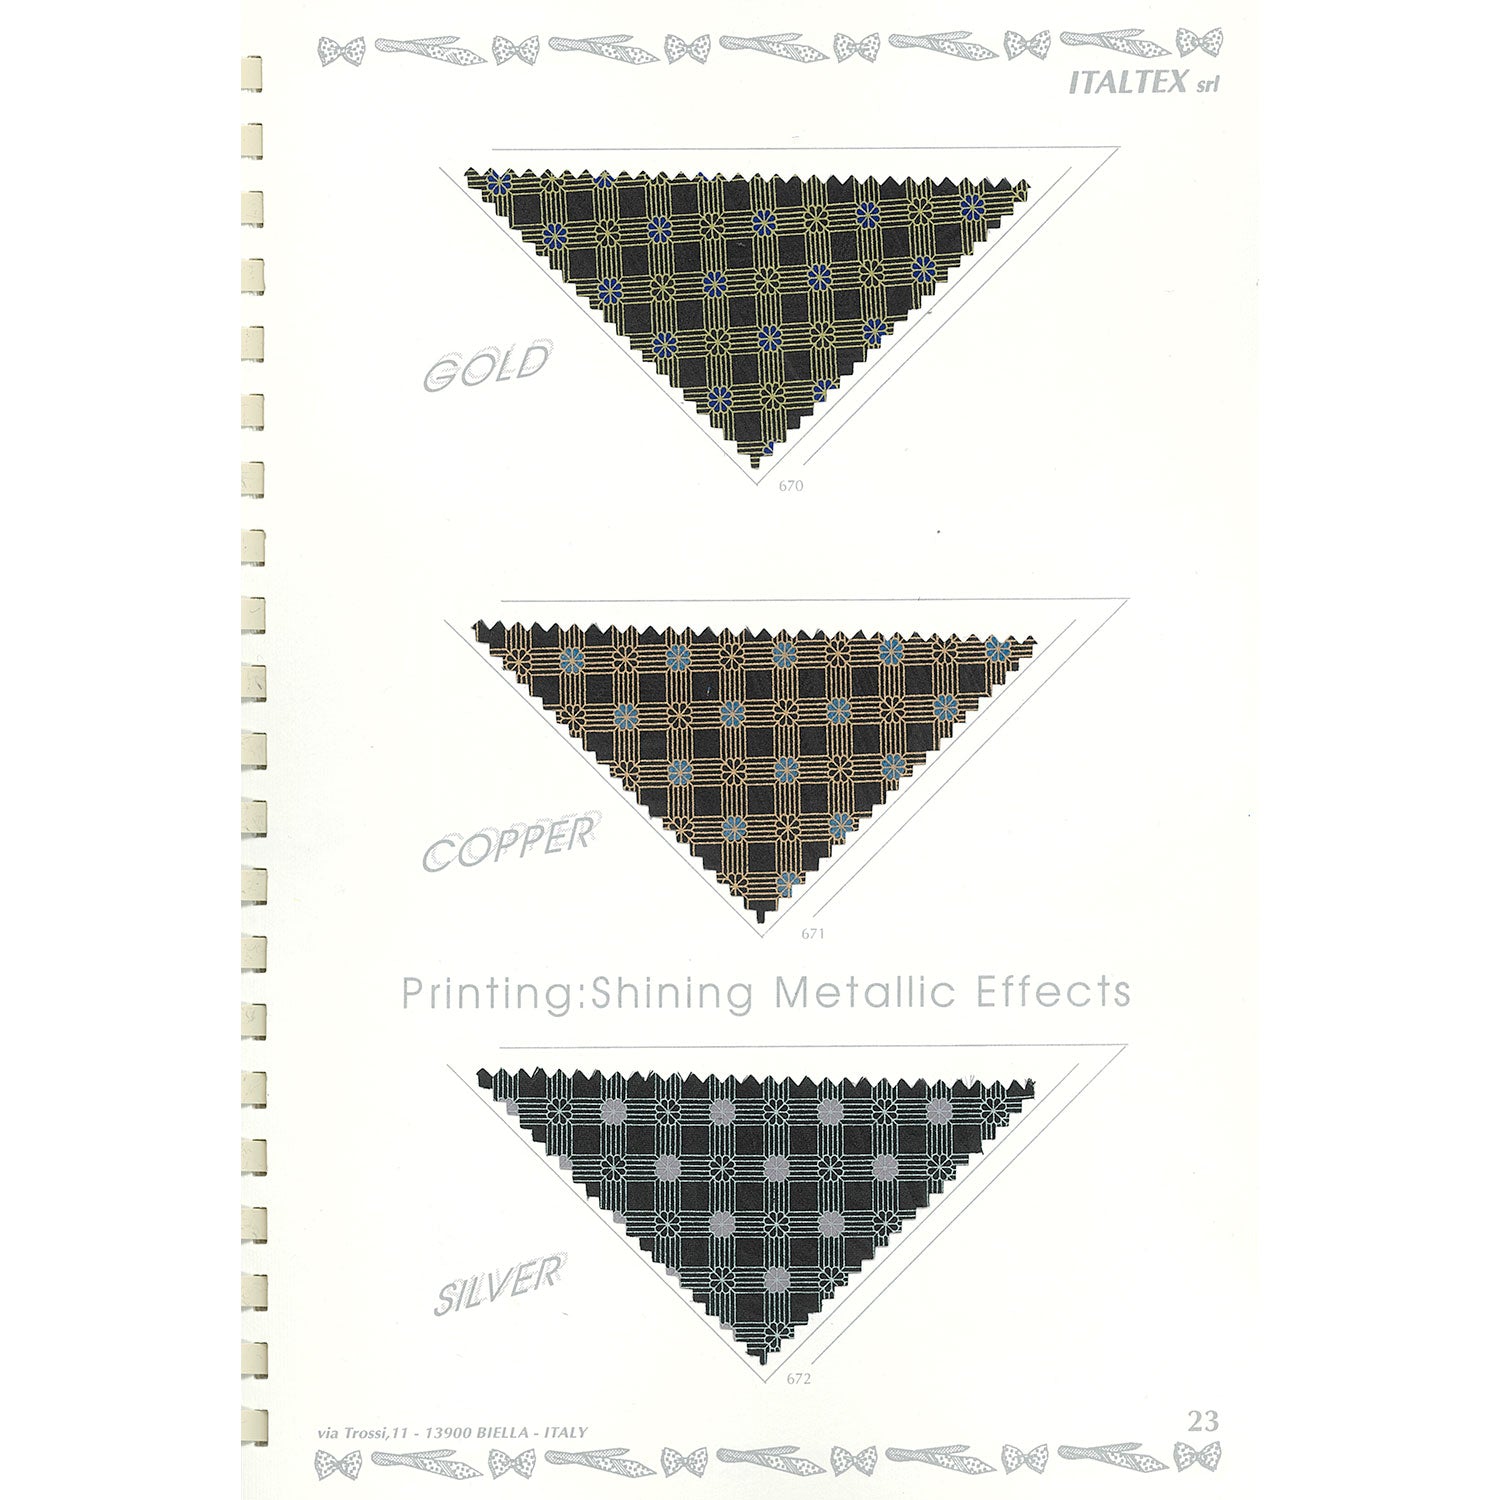 Three fabric swatches from vintage printed ties: fancy window-pane checks with flowers at the intersections: pearl grey/silver/black, beige/cocoa brown/light blue/copper, beige/dark brown/blue/gold